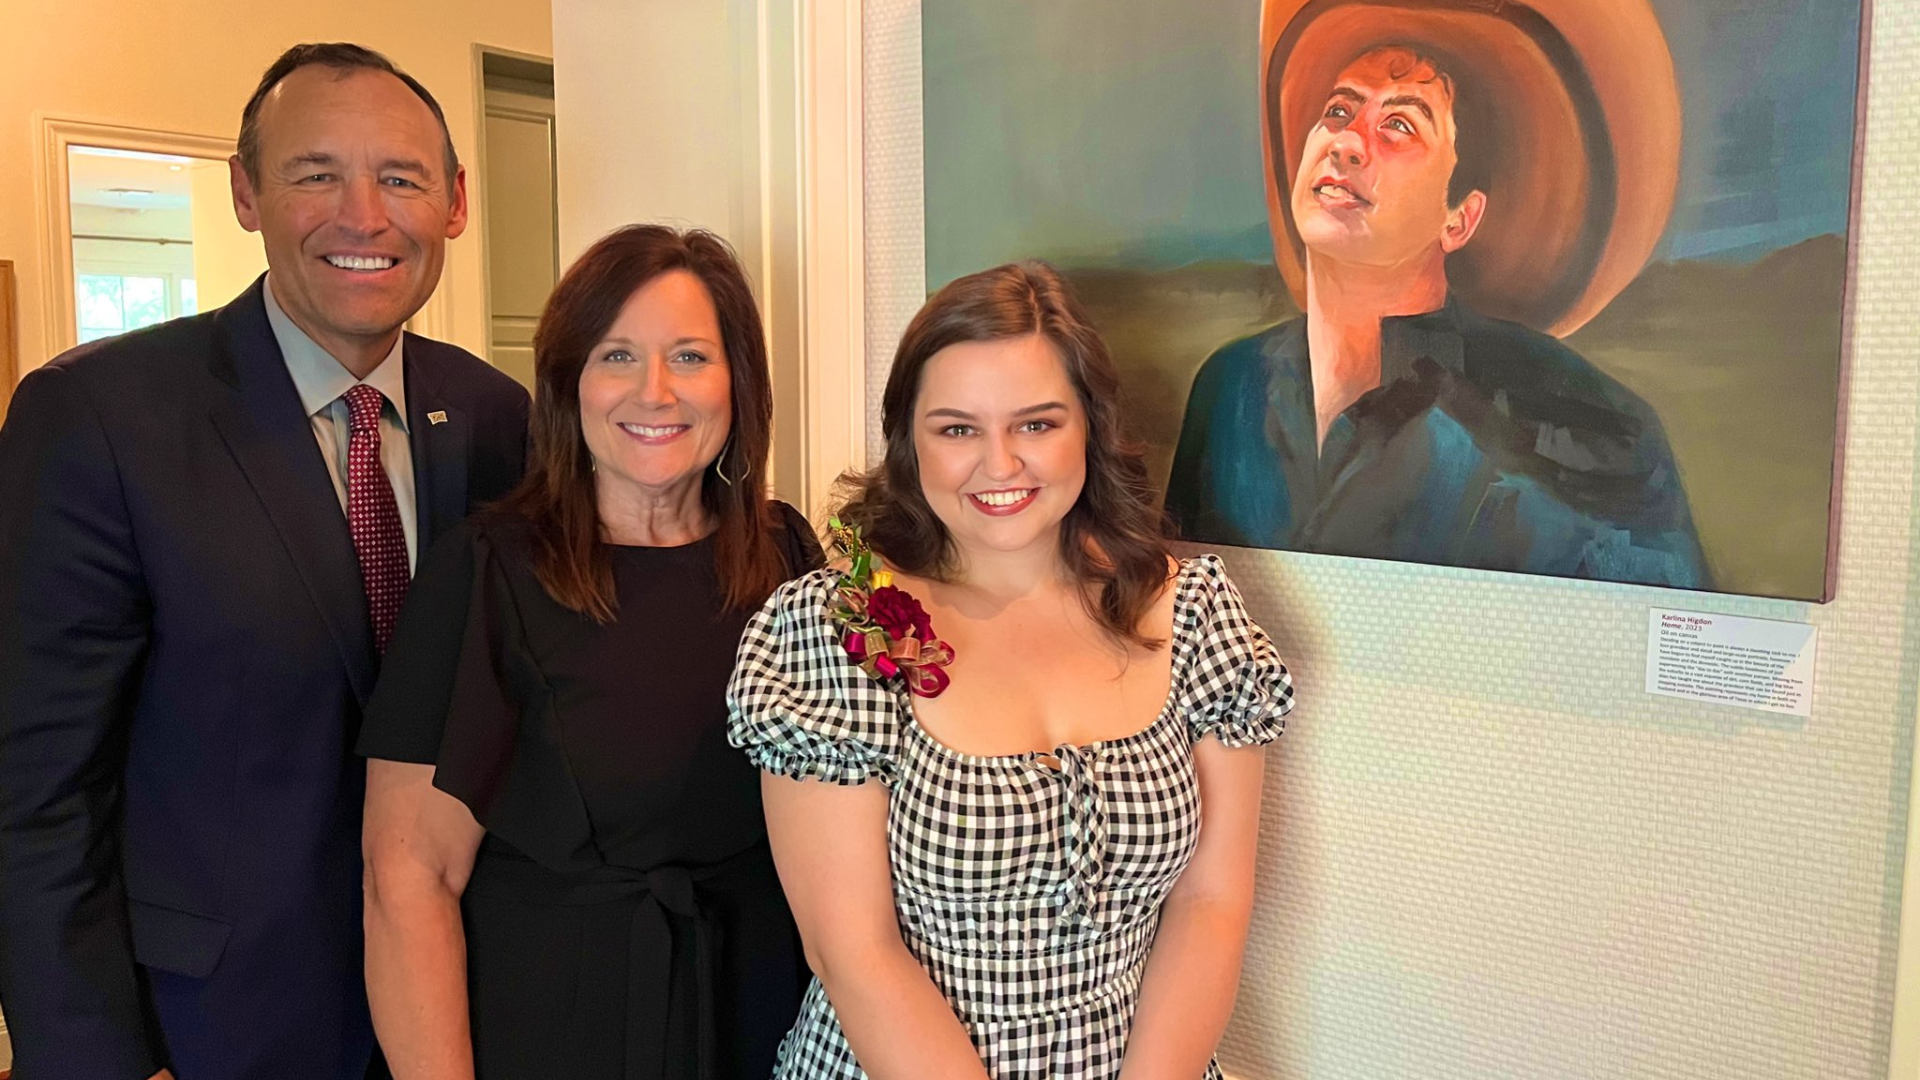 President Damphousse & Beth Damphousse pose with student Karlina Higdon whose artwork was exhibited in the Damphousse's home.  